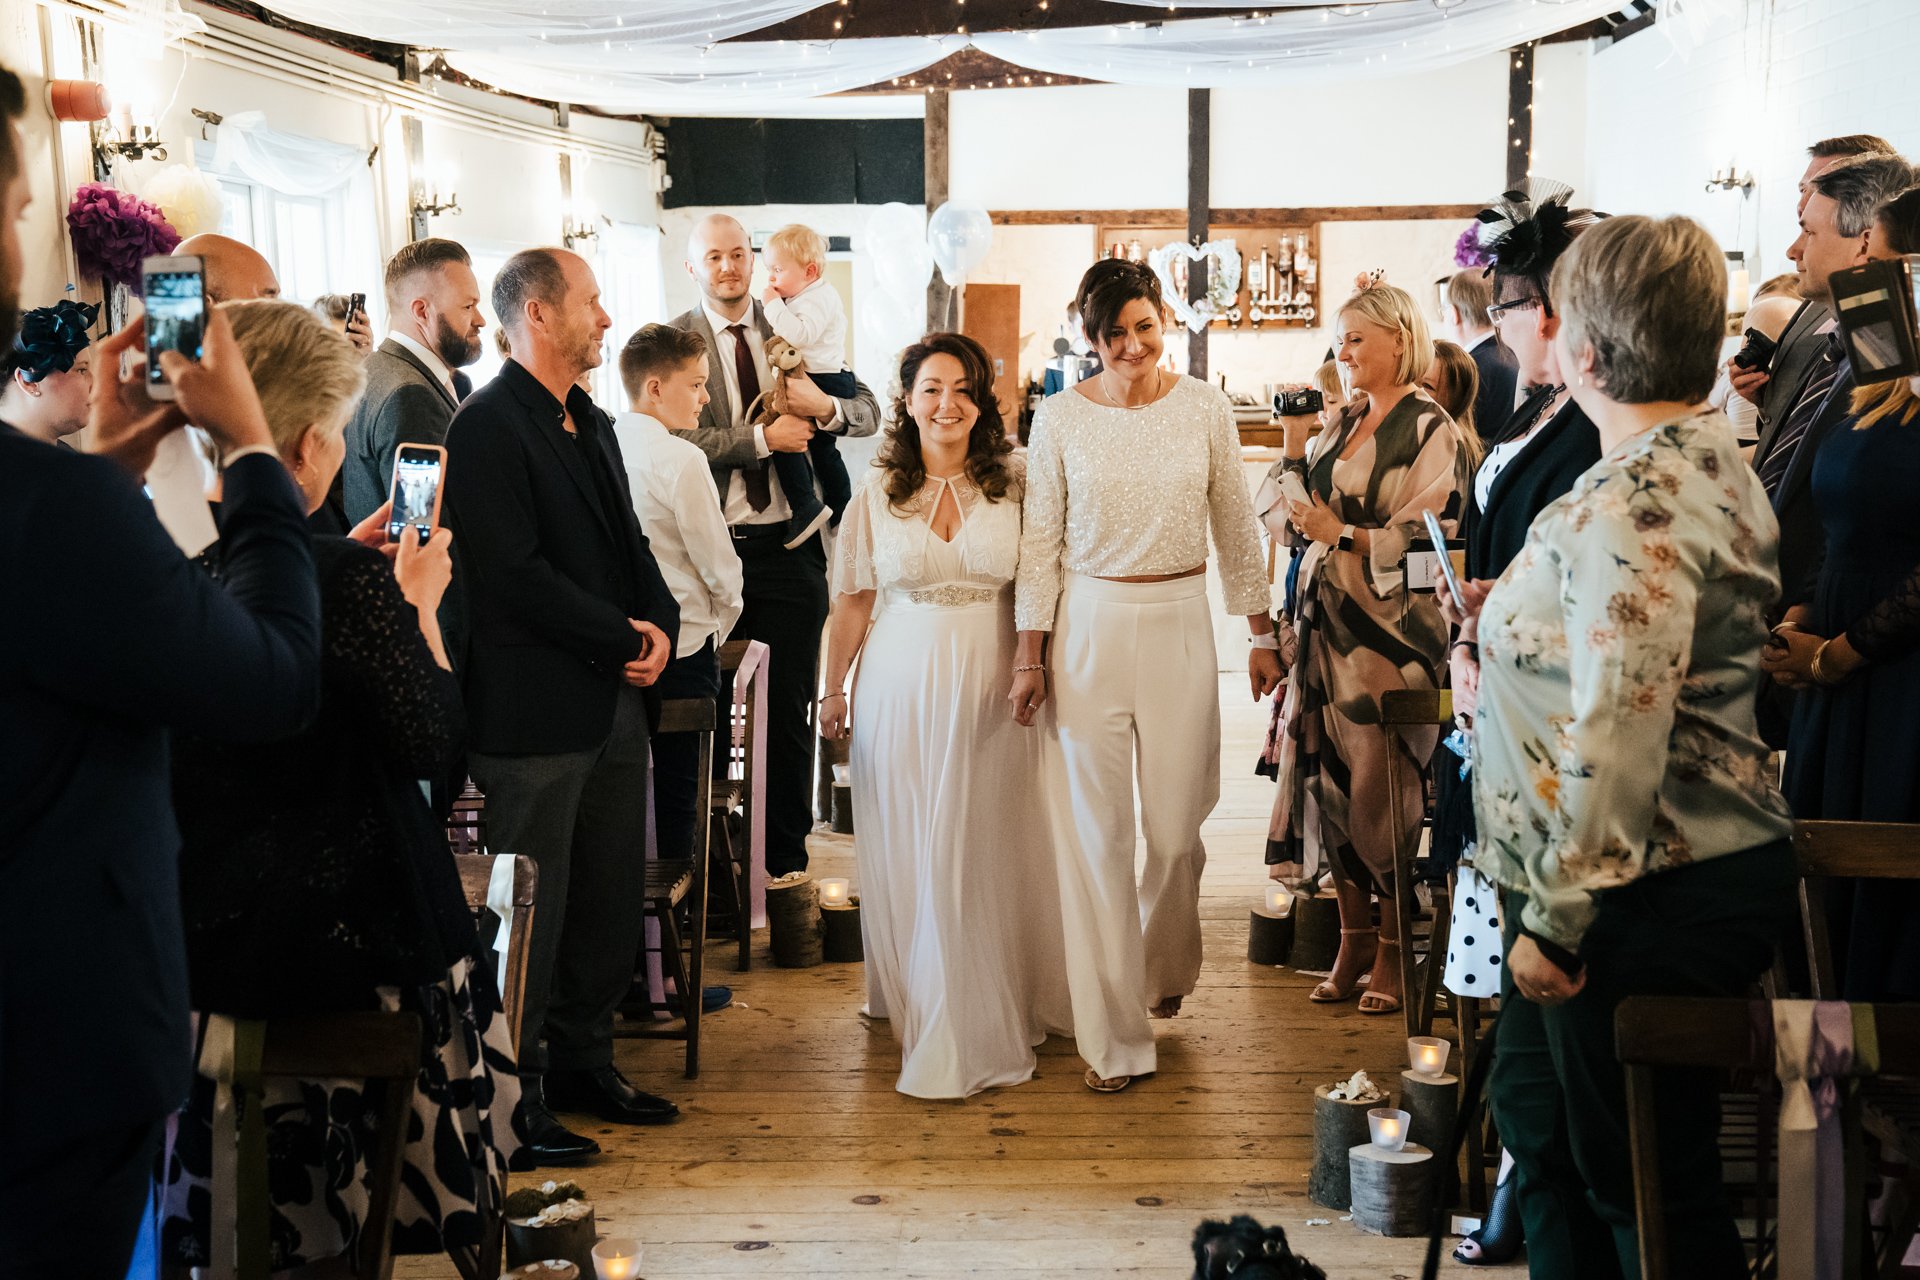 Two Brides walking down the aisle together for the wedding ceremony at The Bull Hotel, Kent